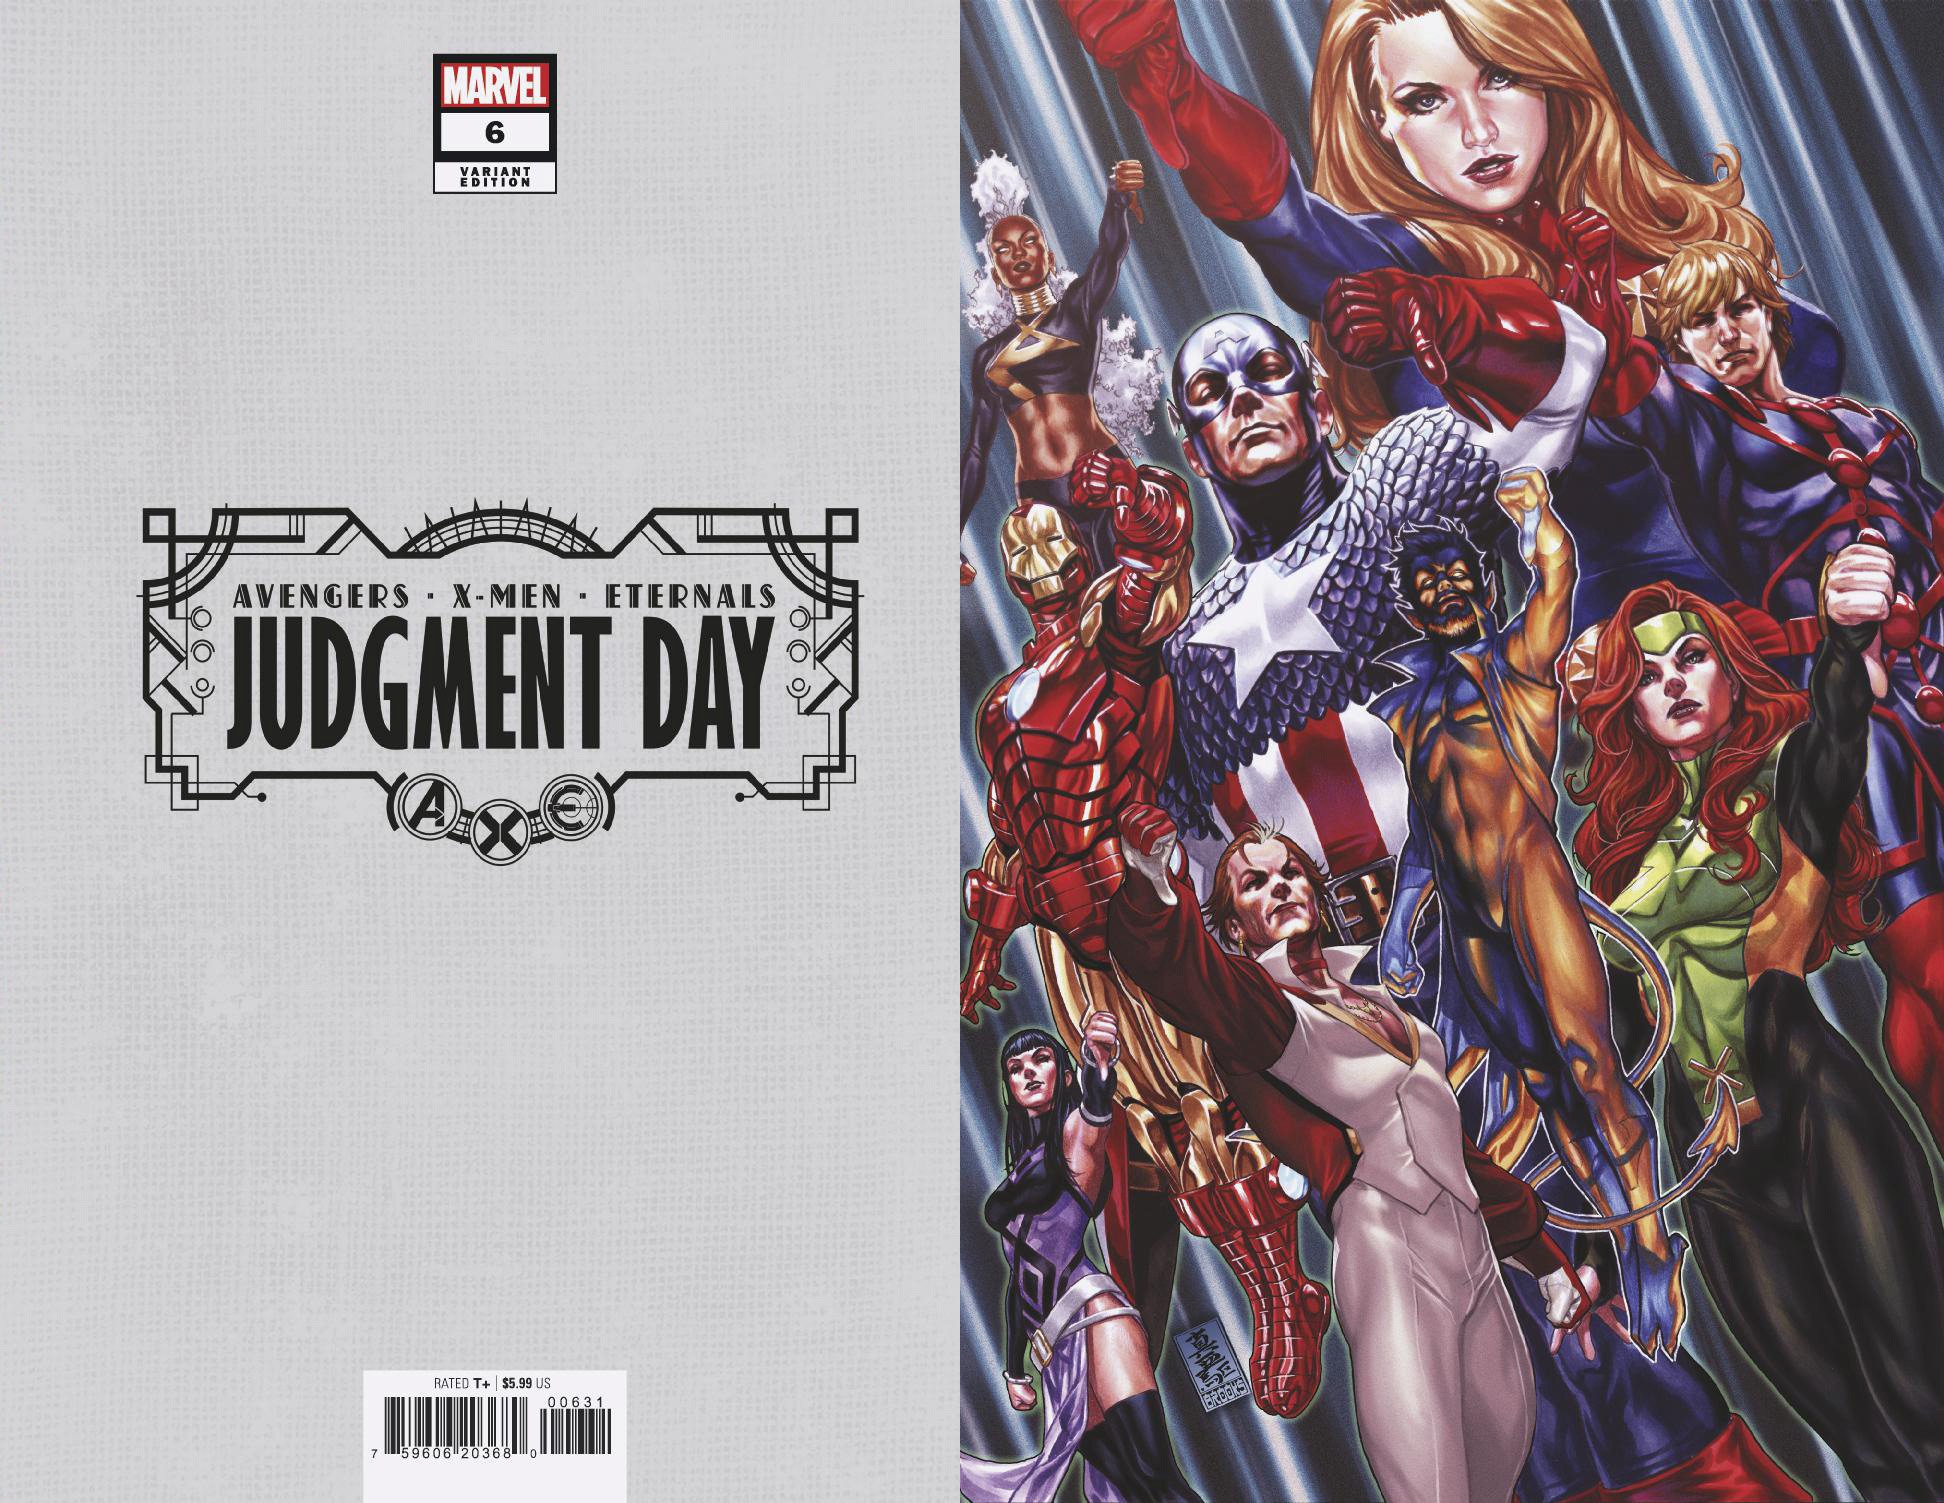 A.X.E. Judgment Day #6 1 for 100 Incentive Brooks Virgin Variant (Of 6)